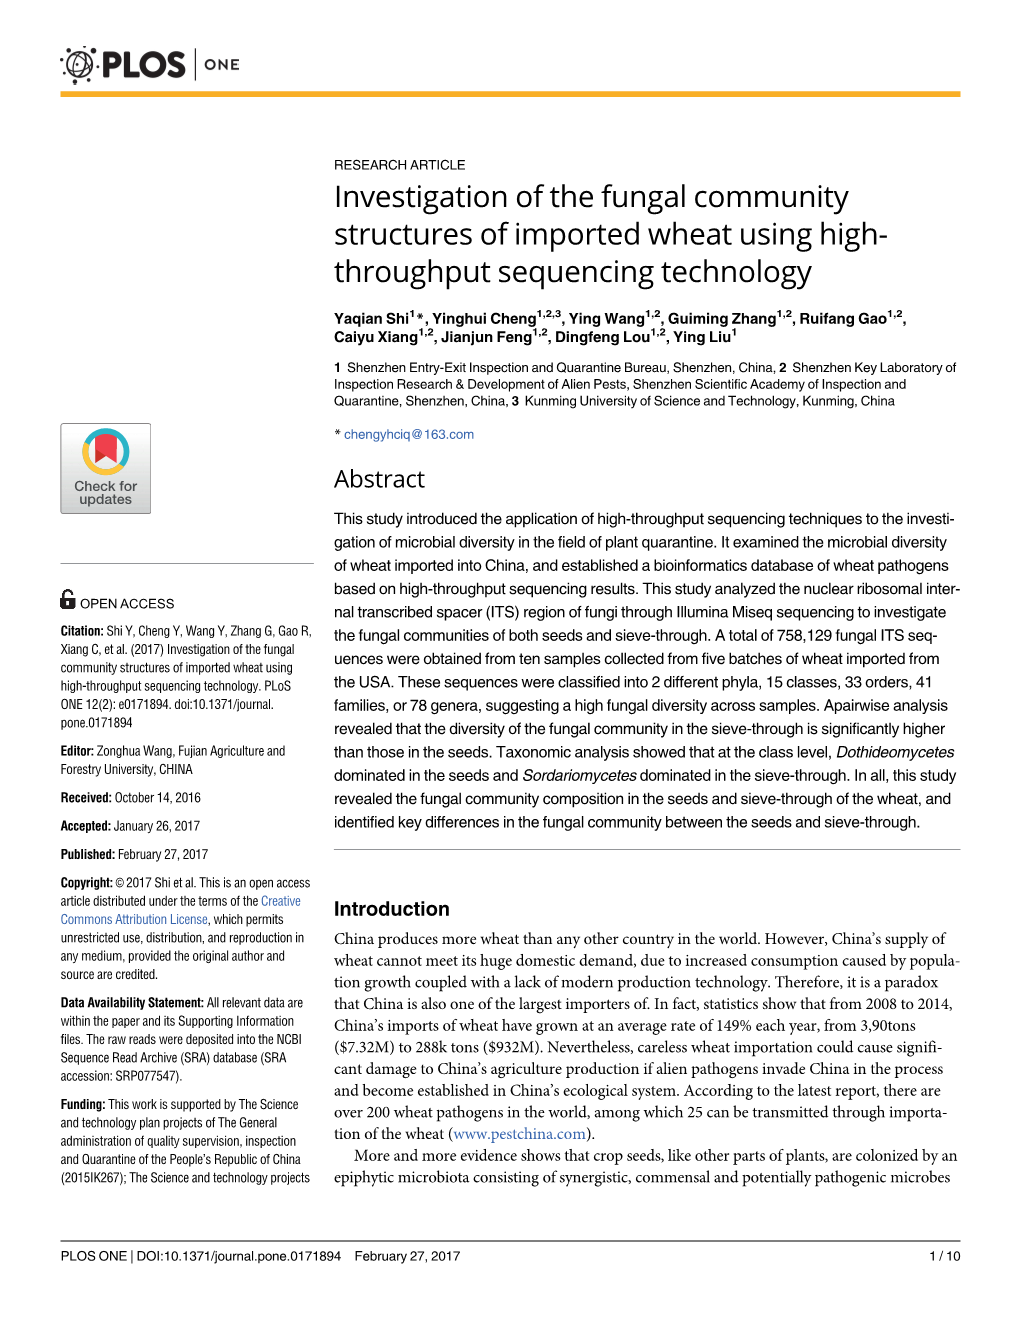 Investigation of the Fungal Community Structures of Imported Wheat Using High- Throughput Sequencing Technology